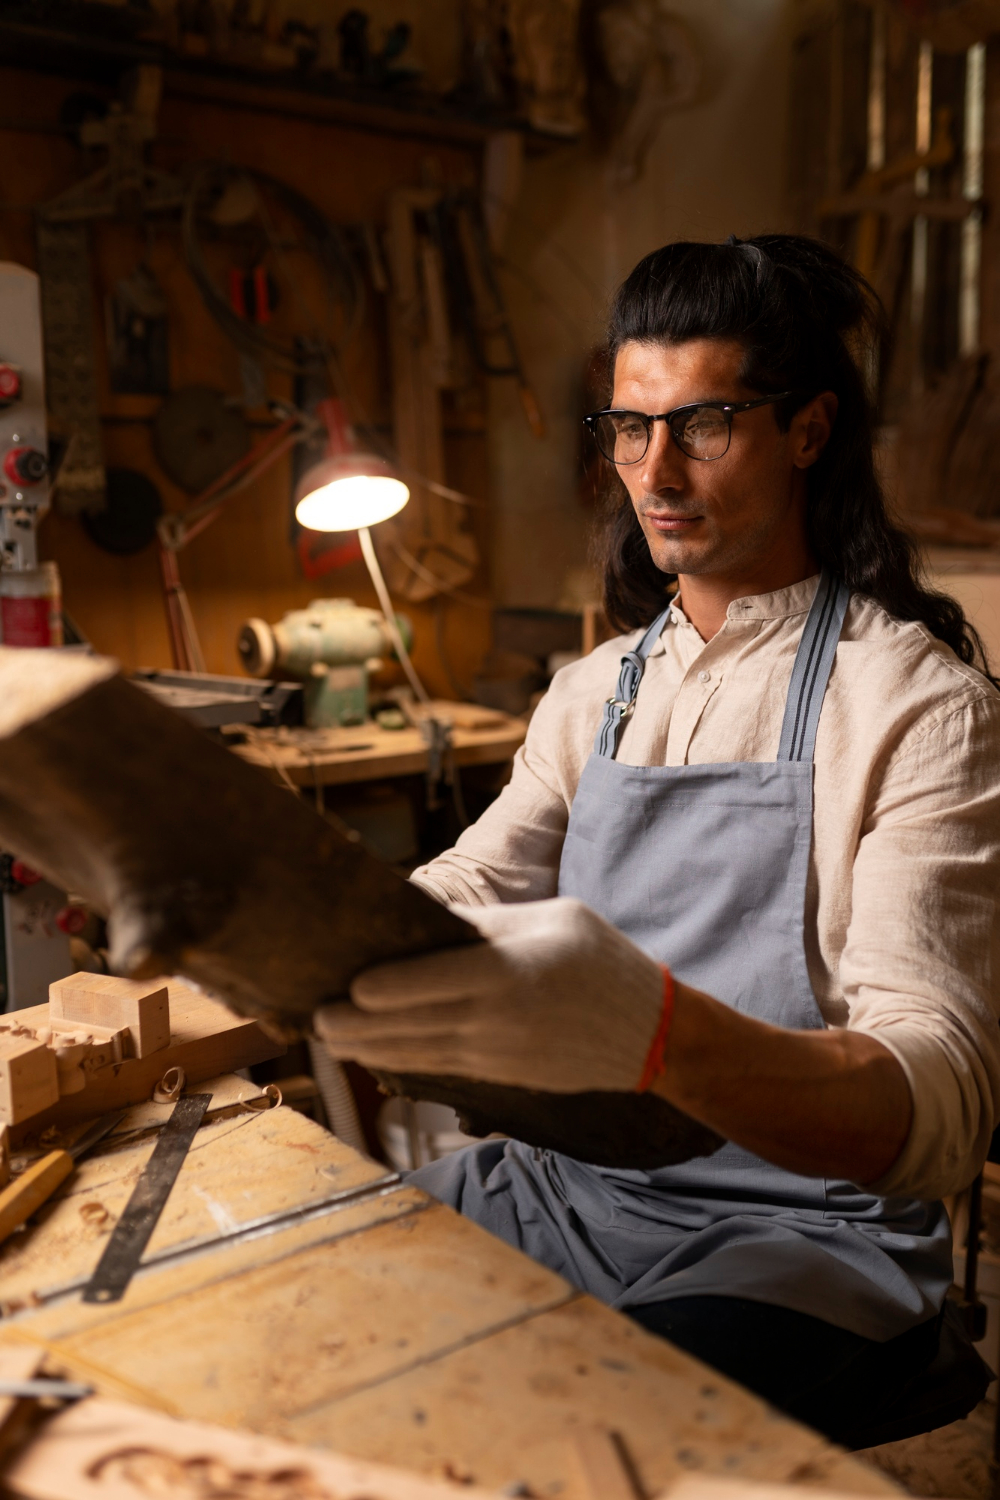 Wooden Wonders: Could Your Woodworking Passion Spark a Profitable Venture?